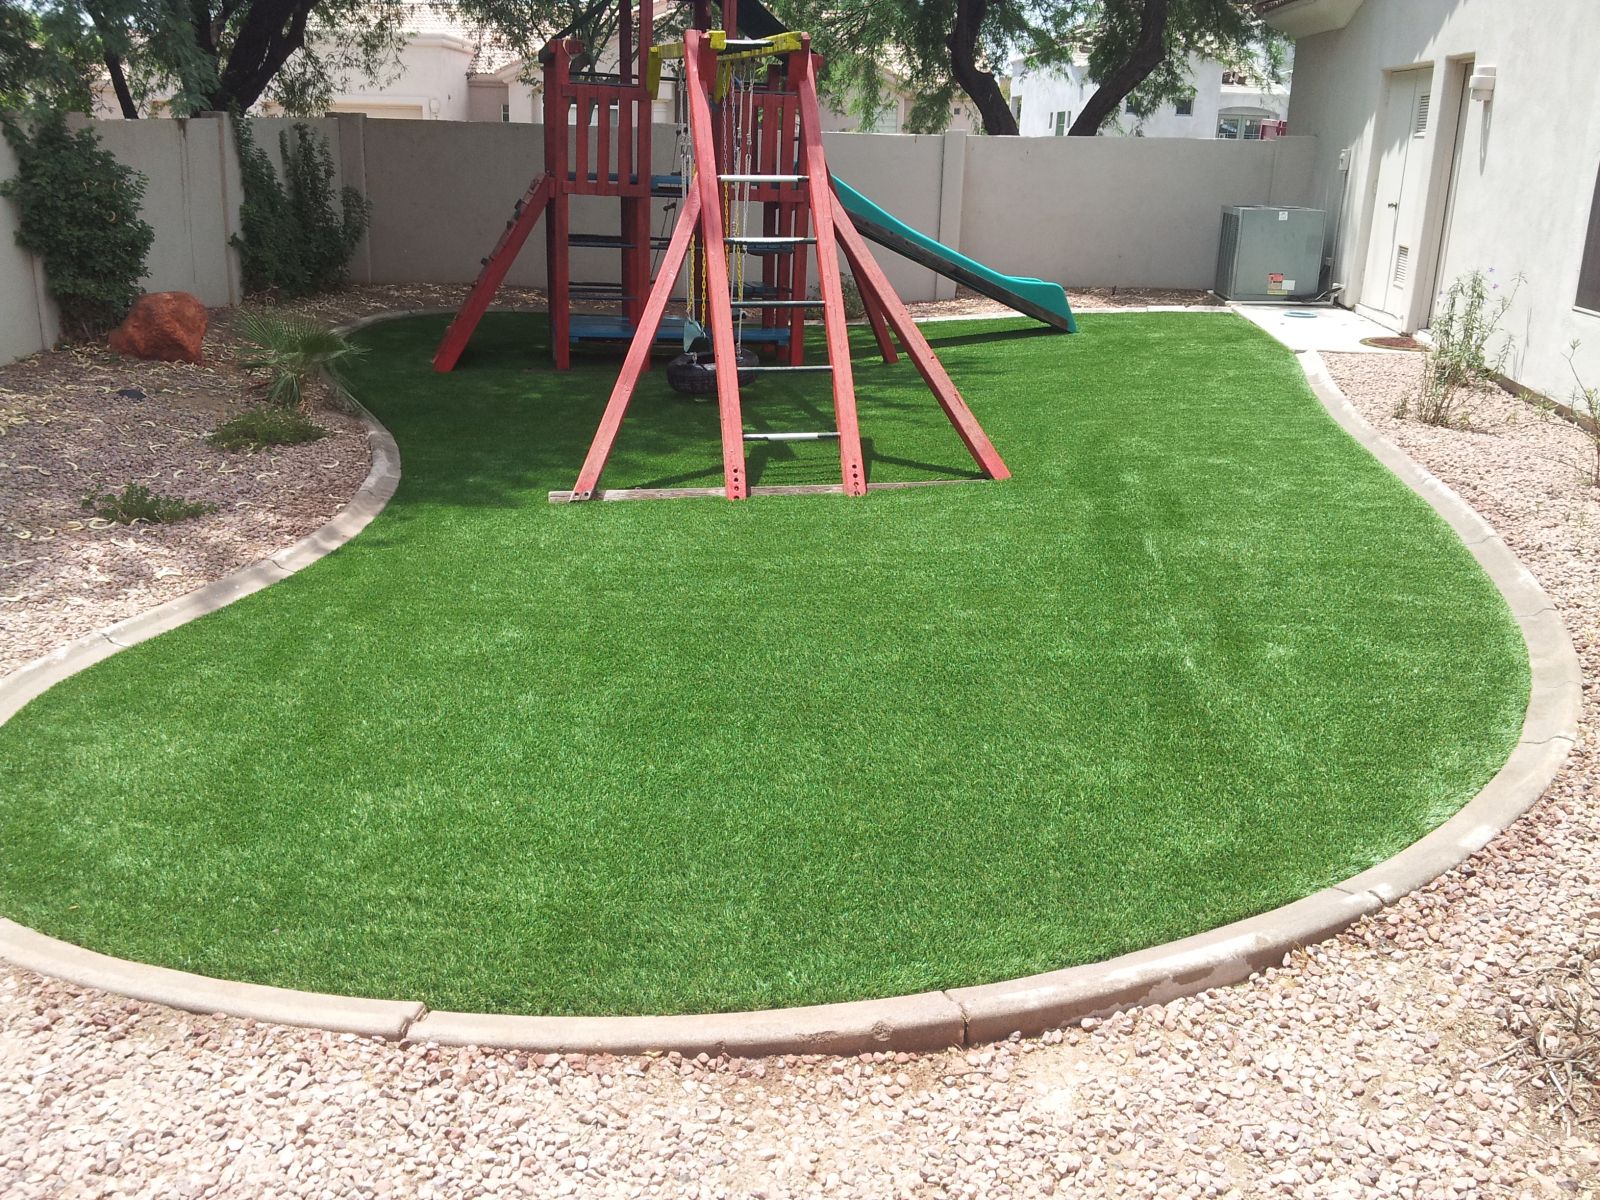 Chandler Fake Grass. Artificial Turf For Kids Play Areas